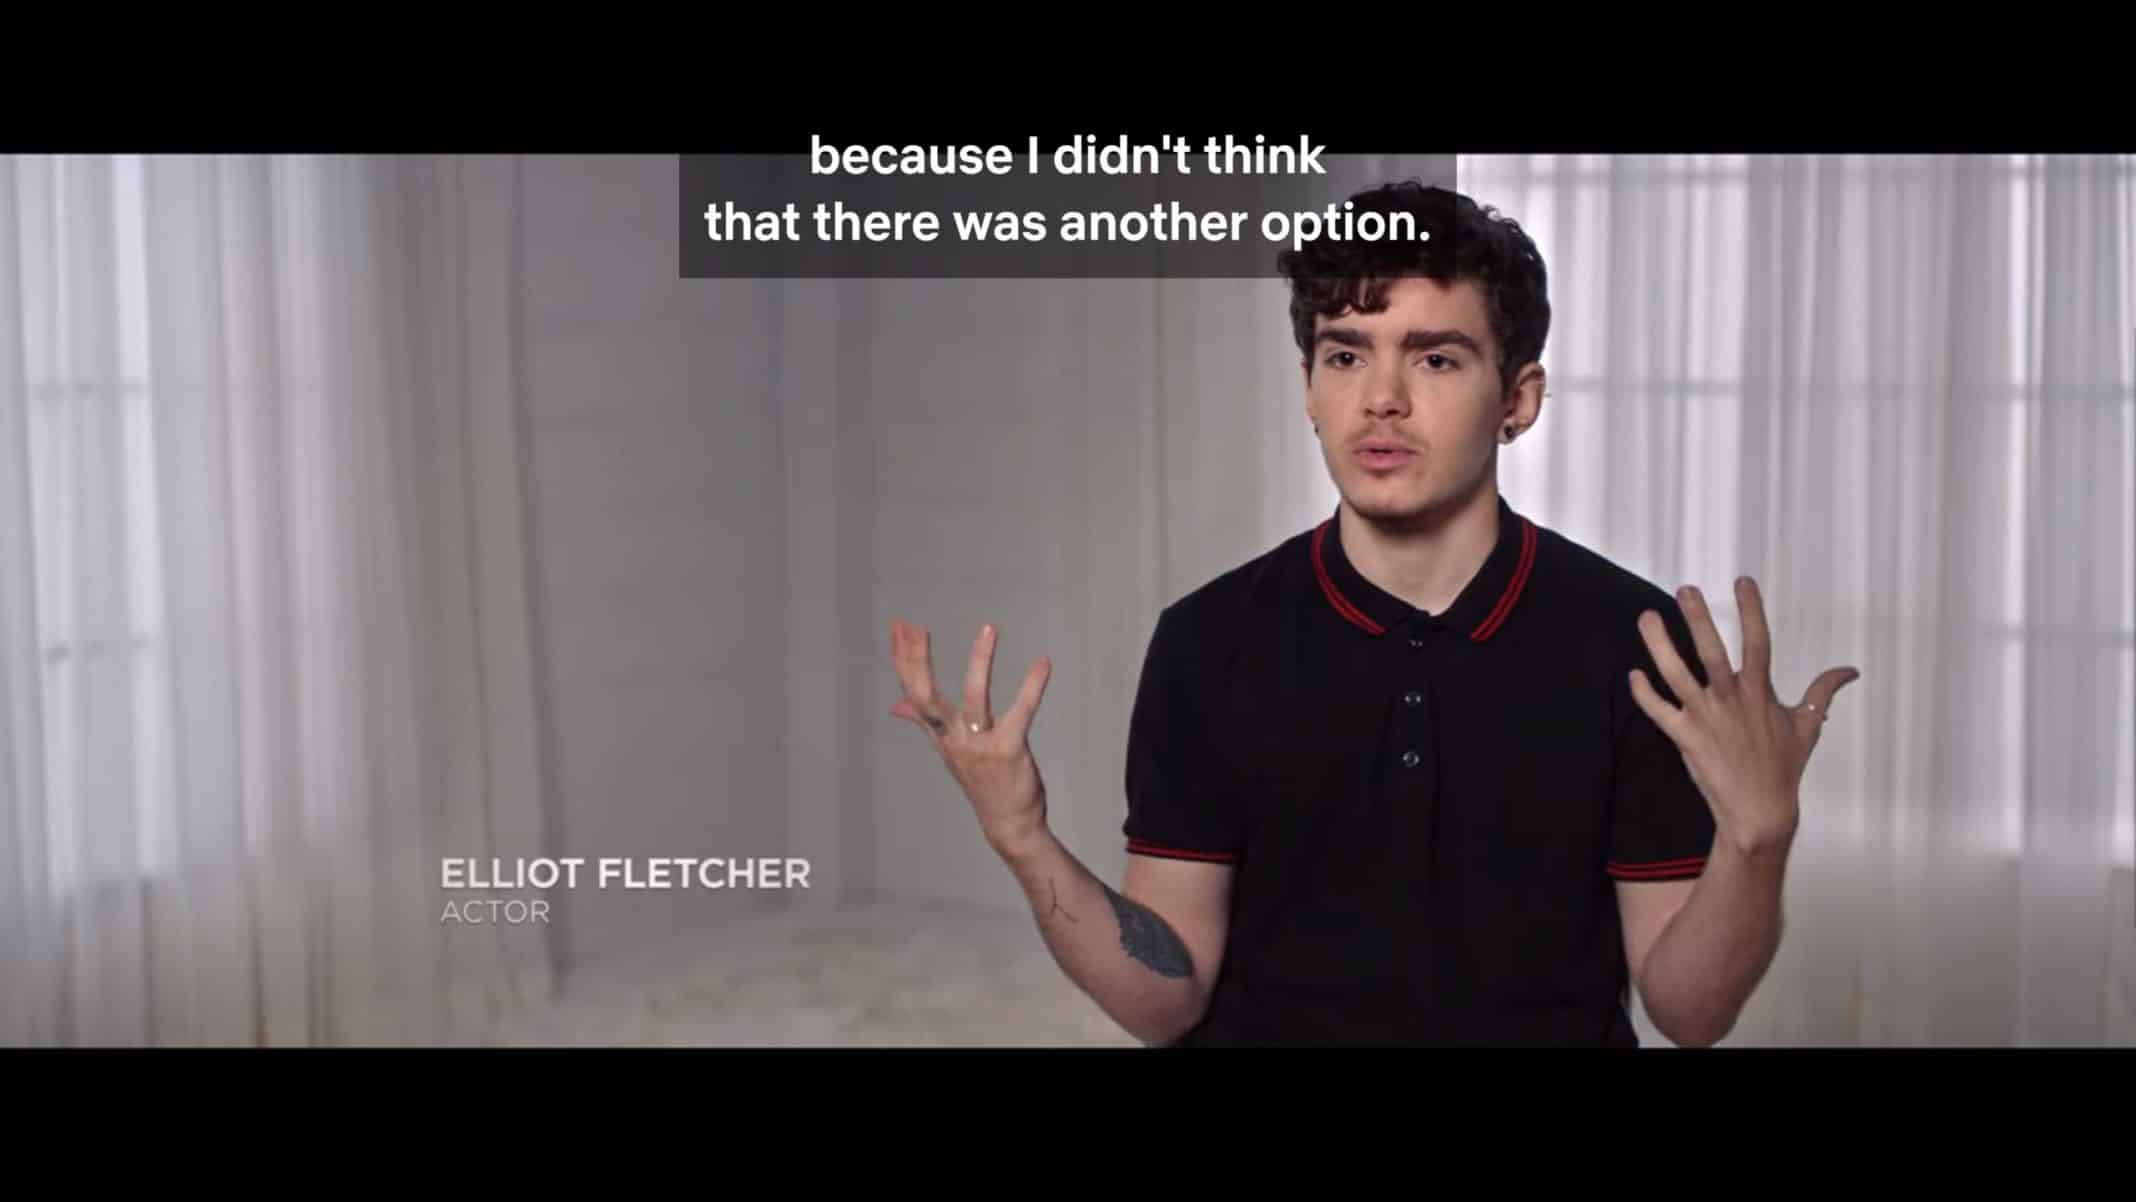 Elliot Fletcher, one of the few young voices in 